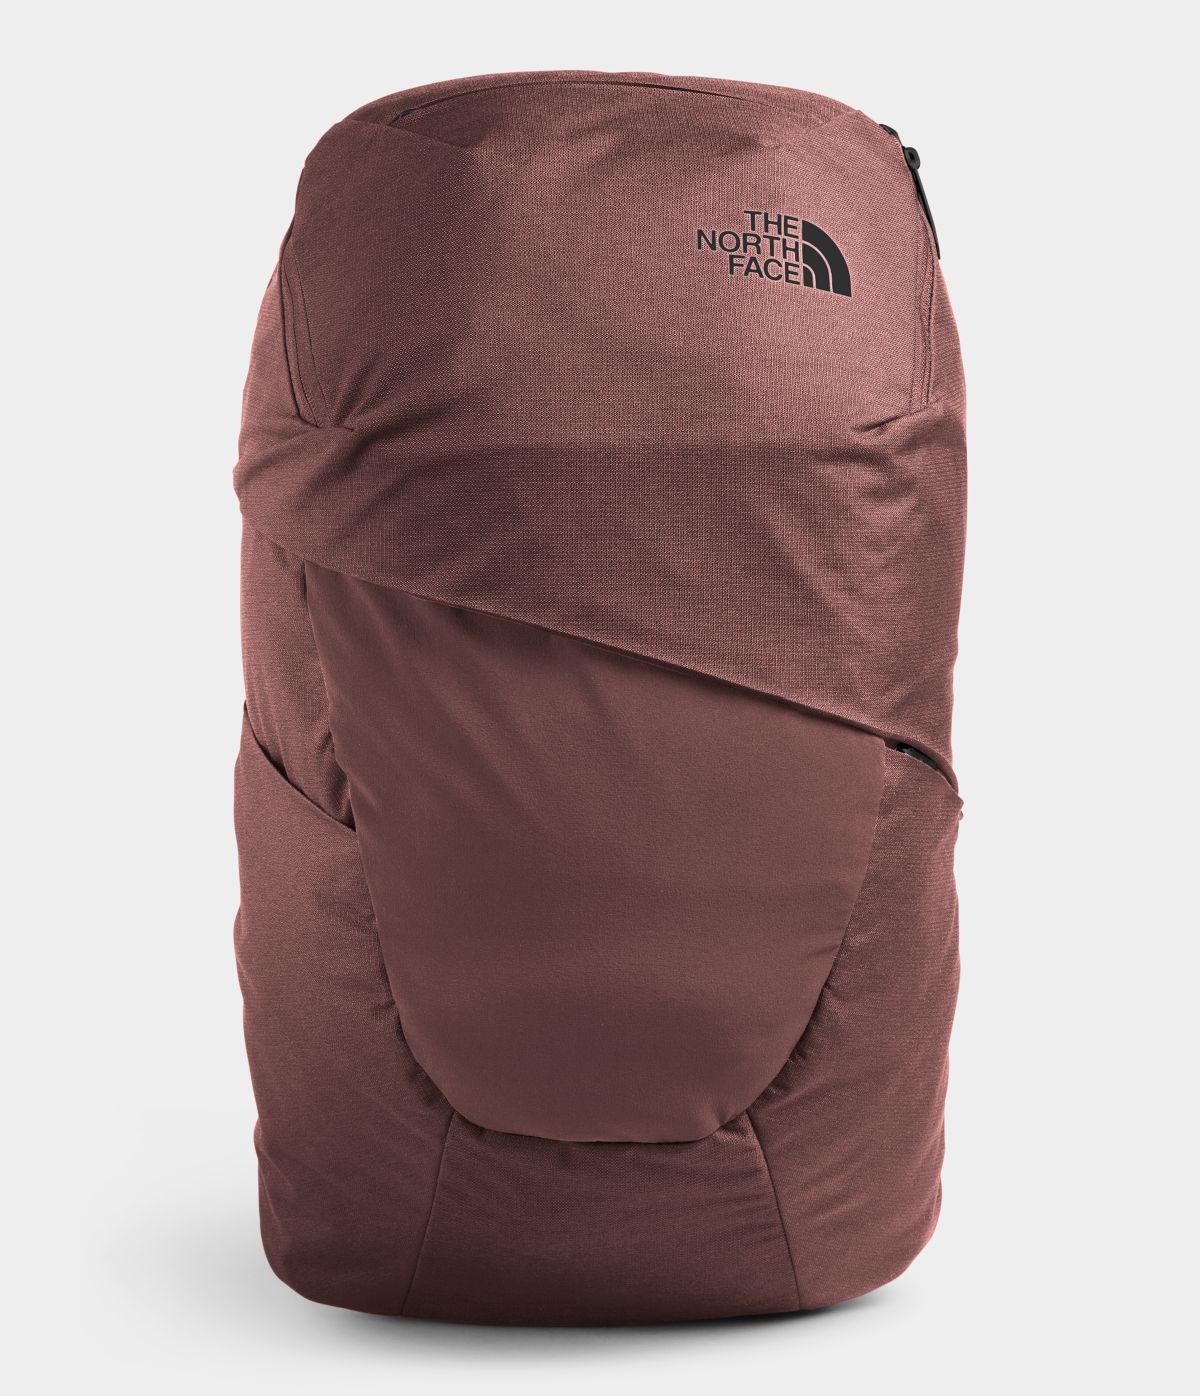 Women's The North Face Aurora Backpack in Marron Purple Dark Heather/TNF Black from front view